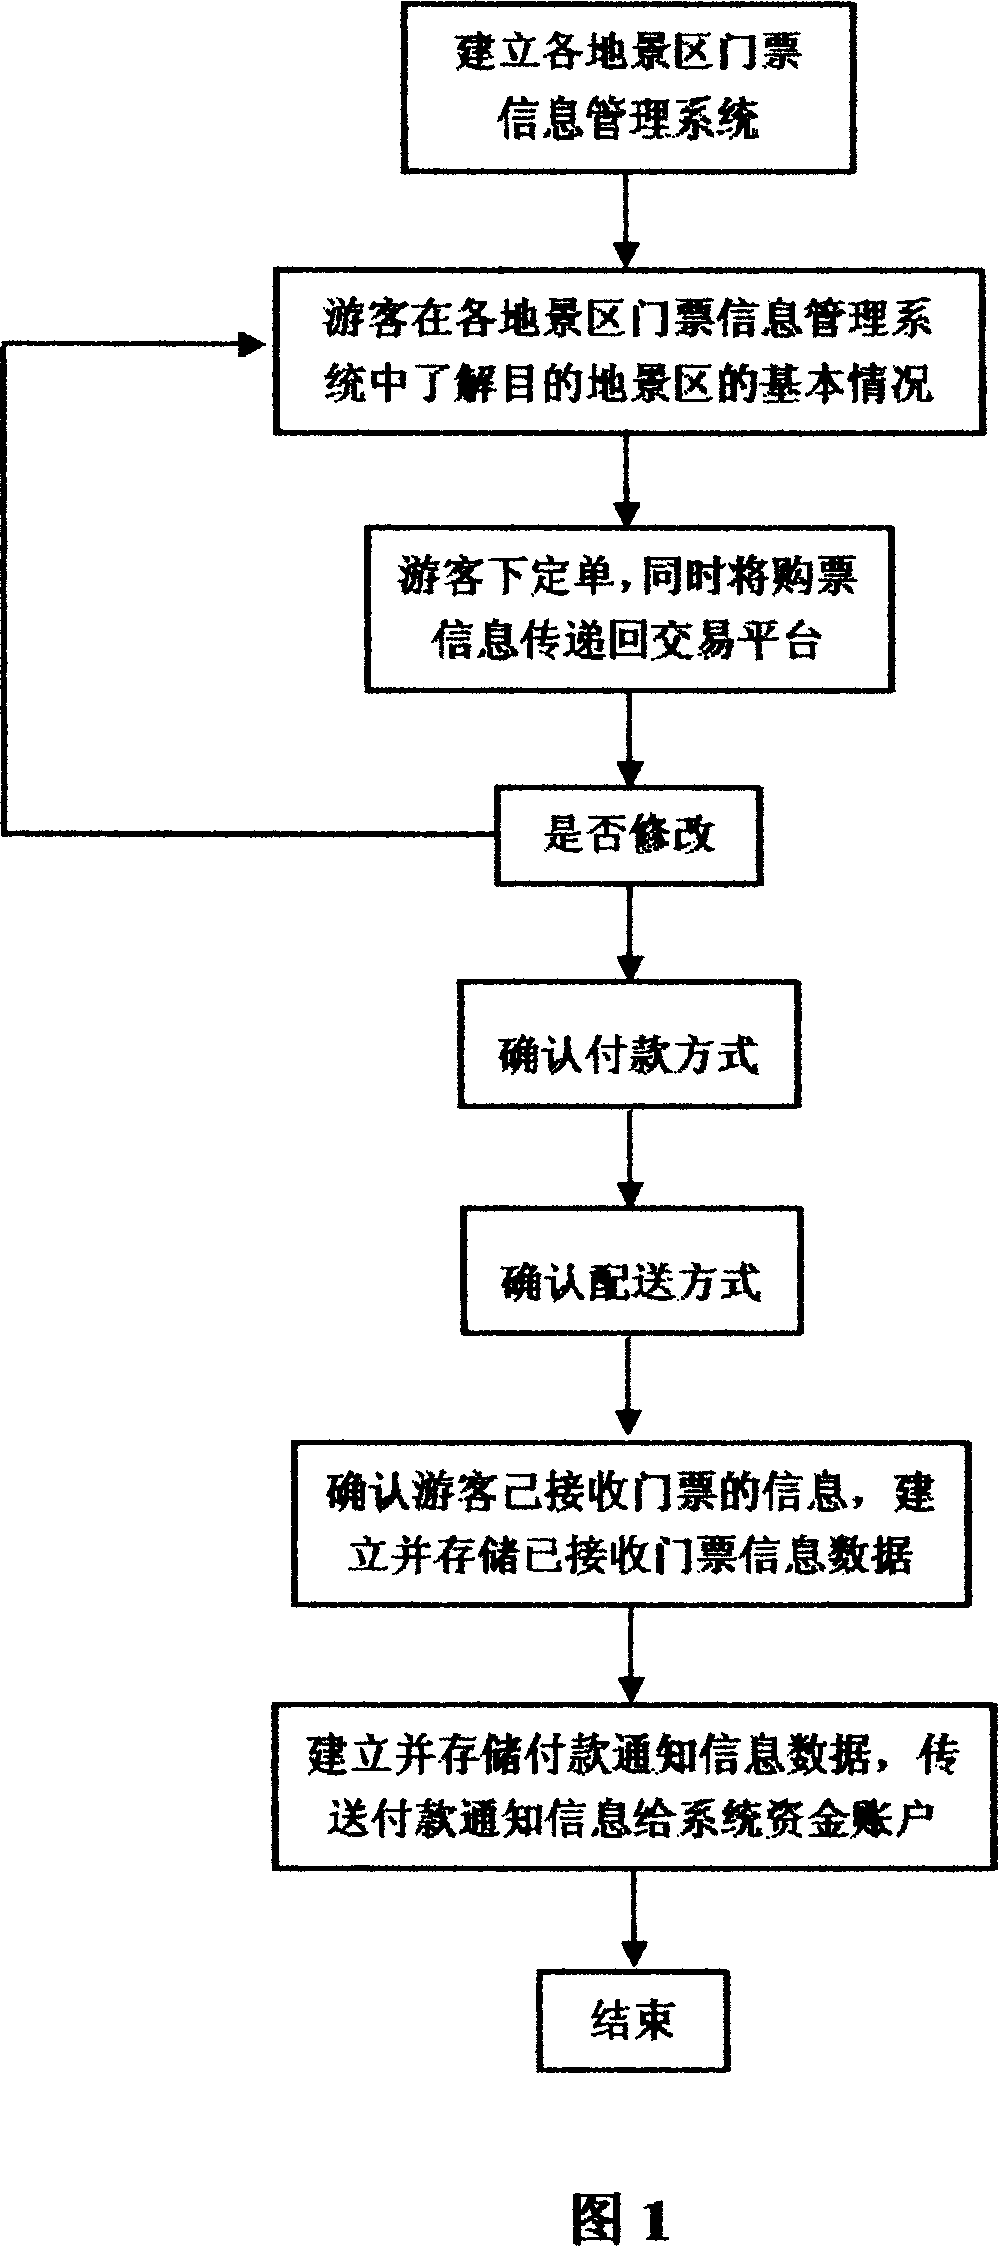 Method for constructing the online transaction platform used for implementing online paying scenic spots ticket